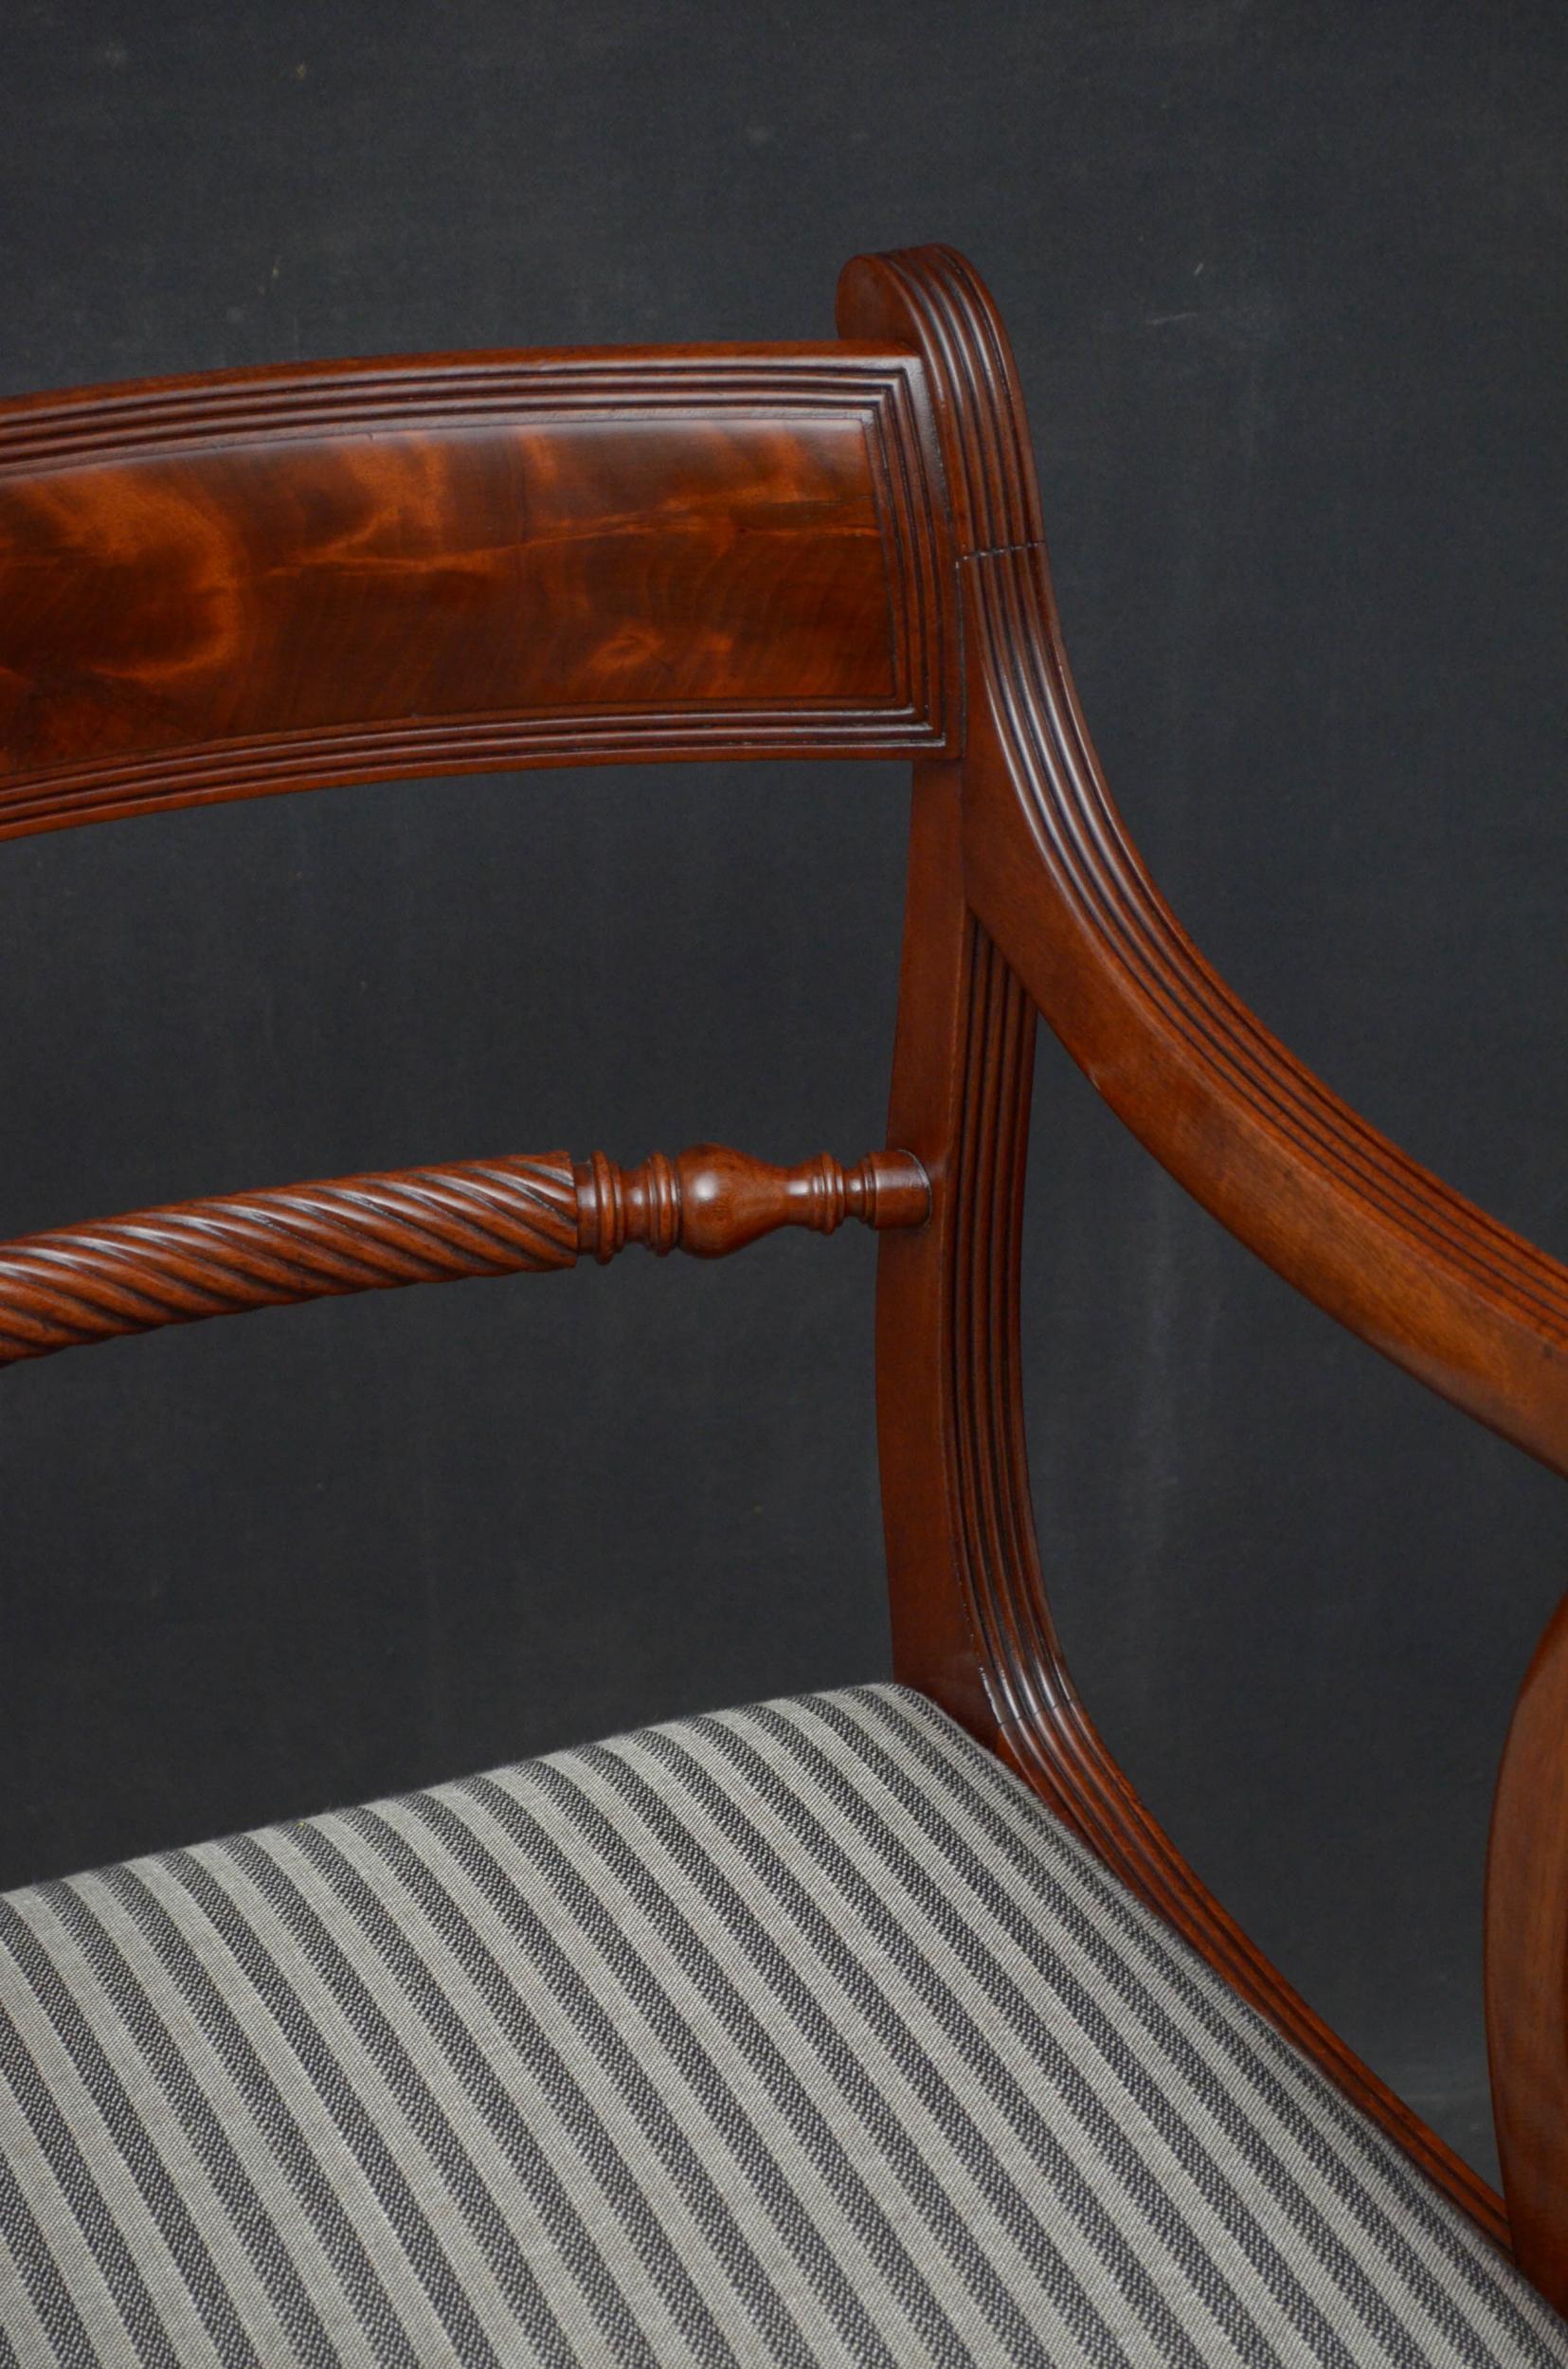 Sn5098 Fine quality Regency carvers, each having flamed mahogany top rail above twisted mid rail and drop in seat with reeded front rail below, flanked by open, reeded and scroll arms terminating in reeded sabre legs. This antique pair of elbow